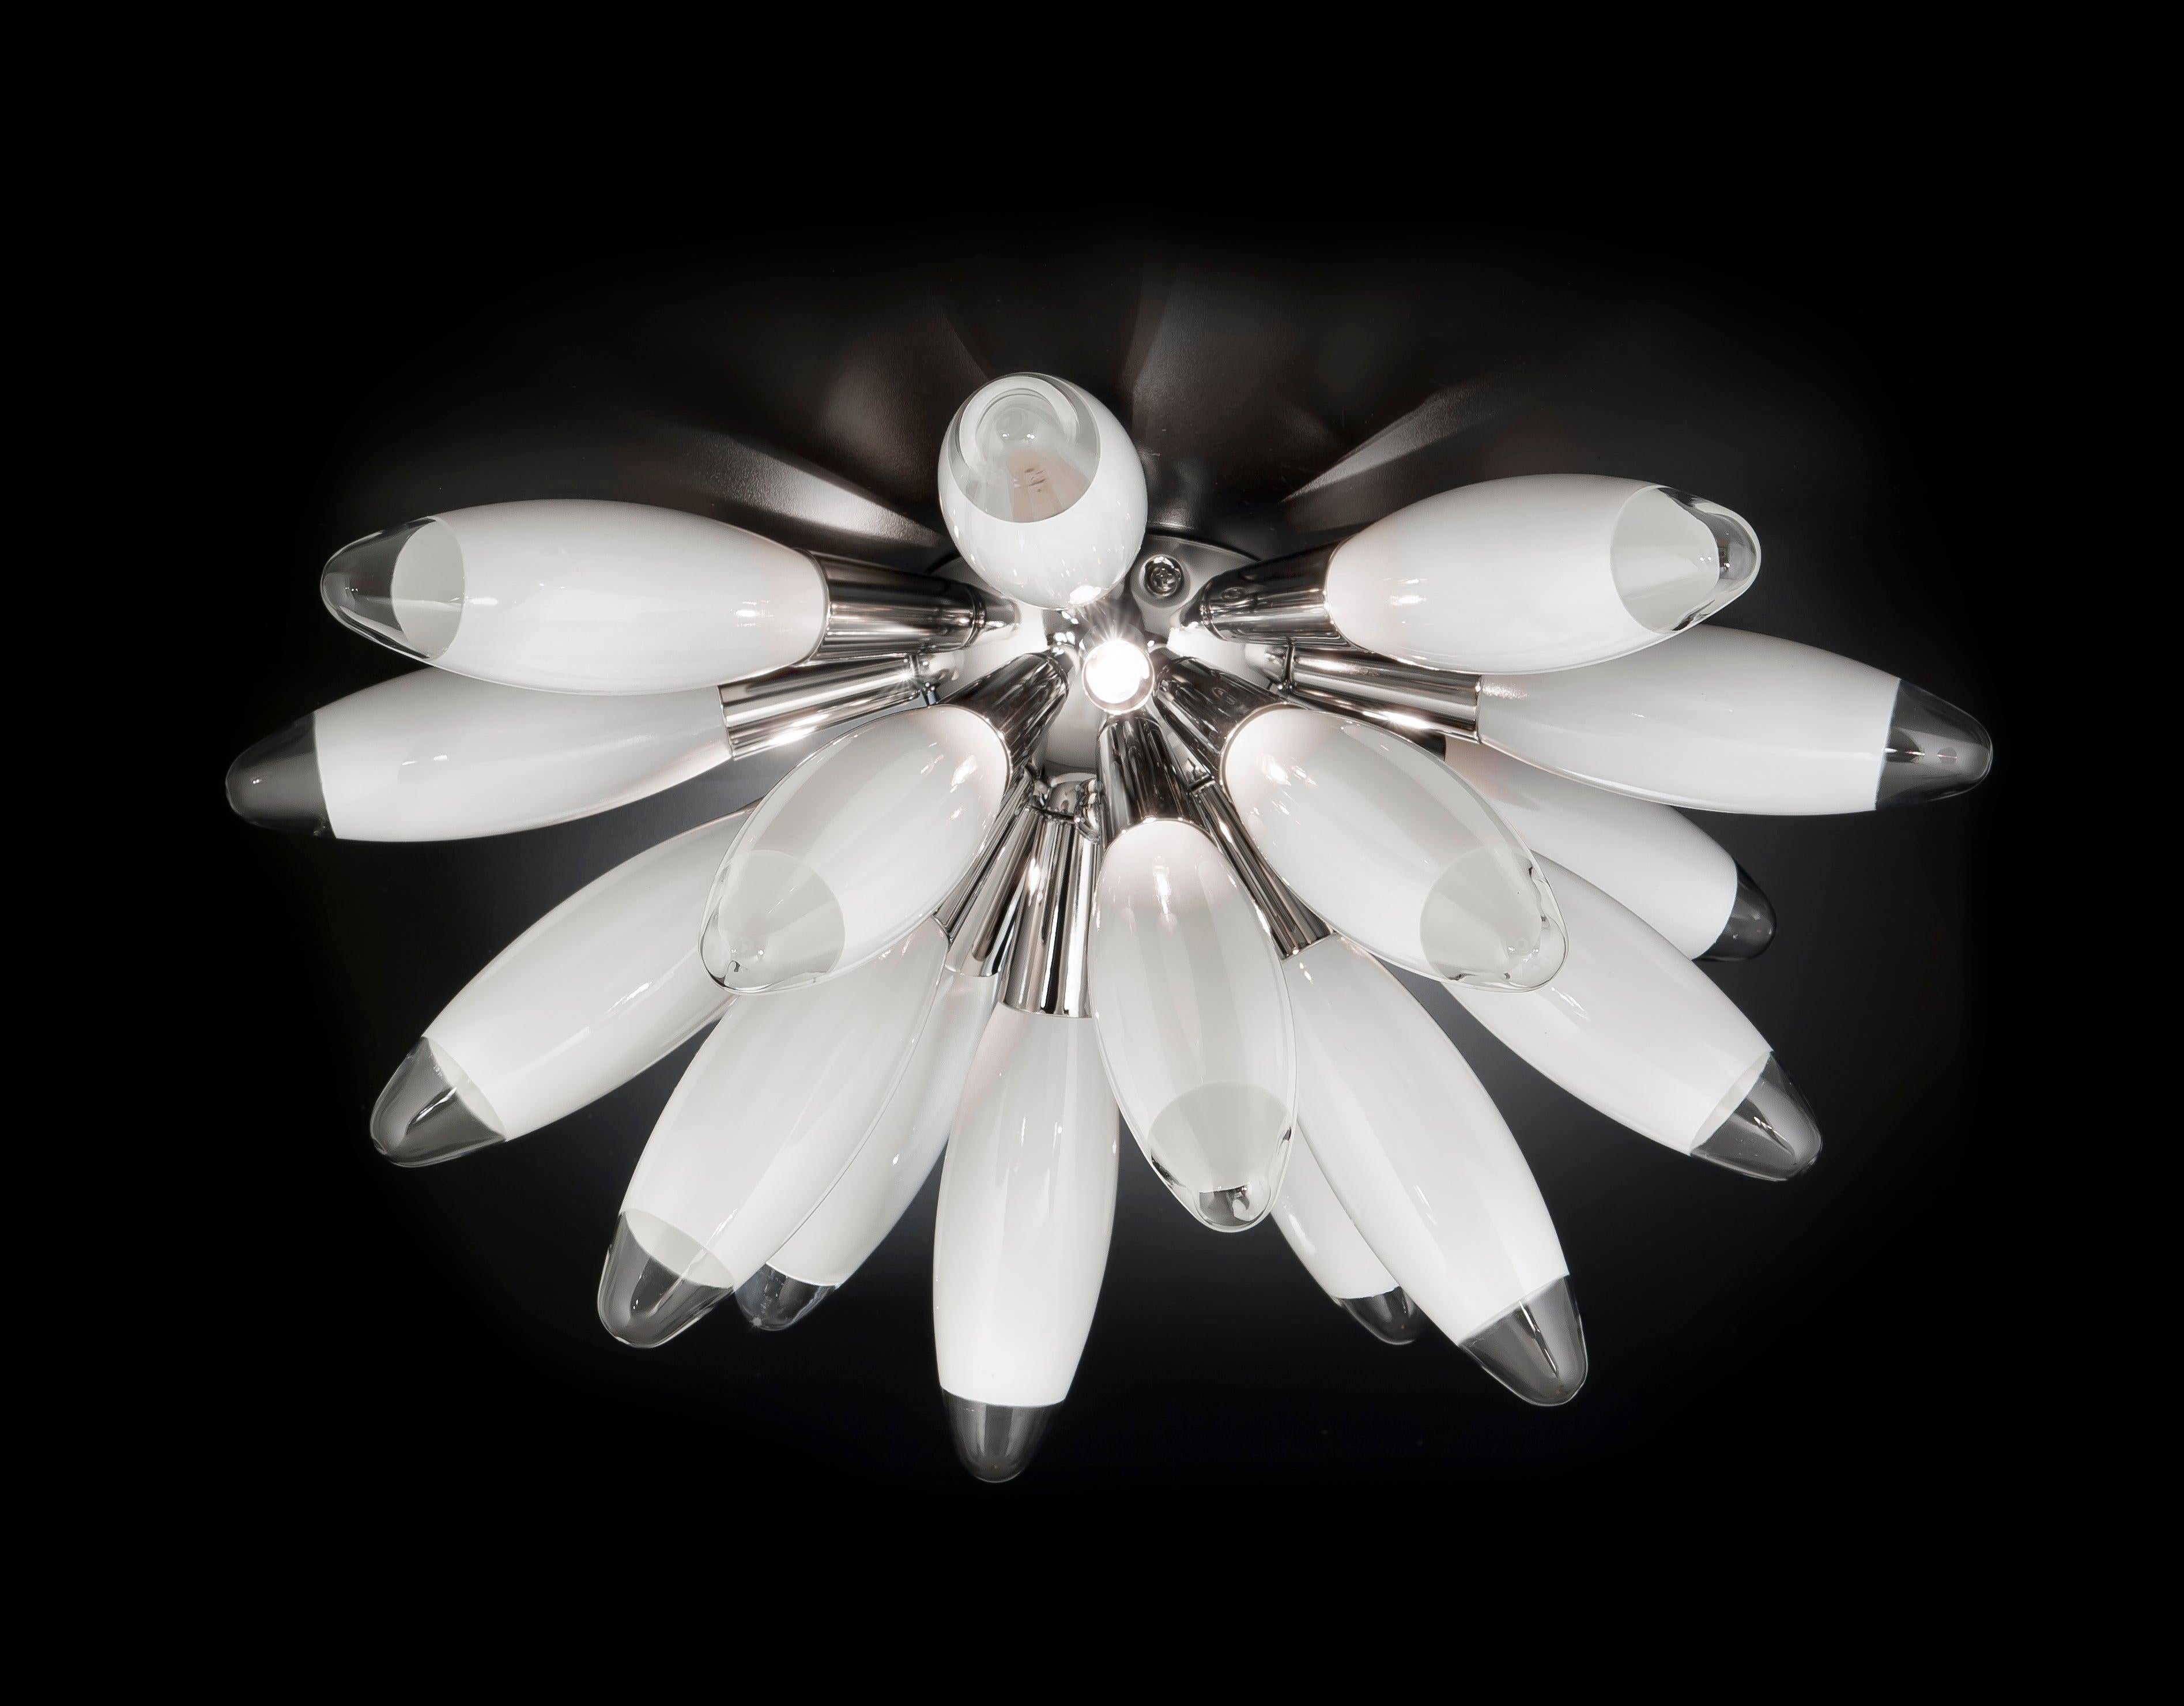 Italian torpedo half Sputnik chandelier with 18 white blown glasses, mounted on chrome finish metal frame / Designed by Fabio Bergomi for Fabio Ltd / Made in Italy
3 lights / G9 type / max 40W each
Measures: Diameter 21.5 inches / height 10